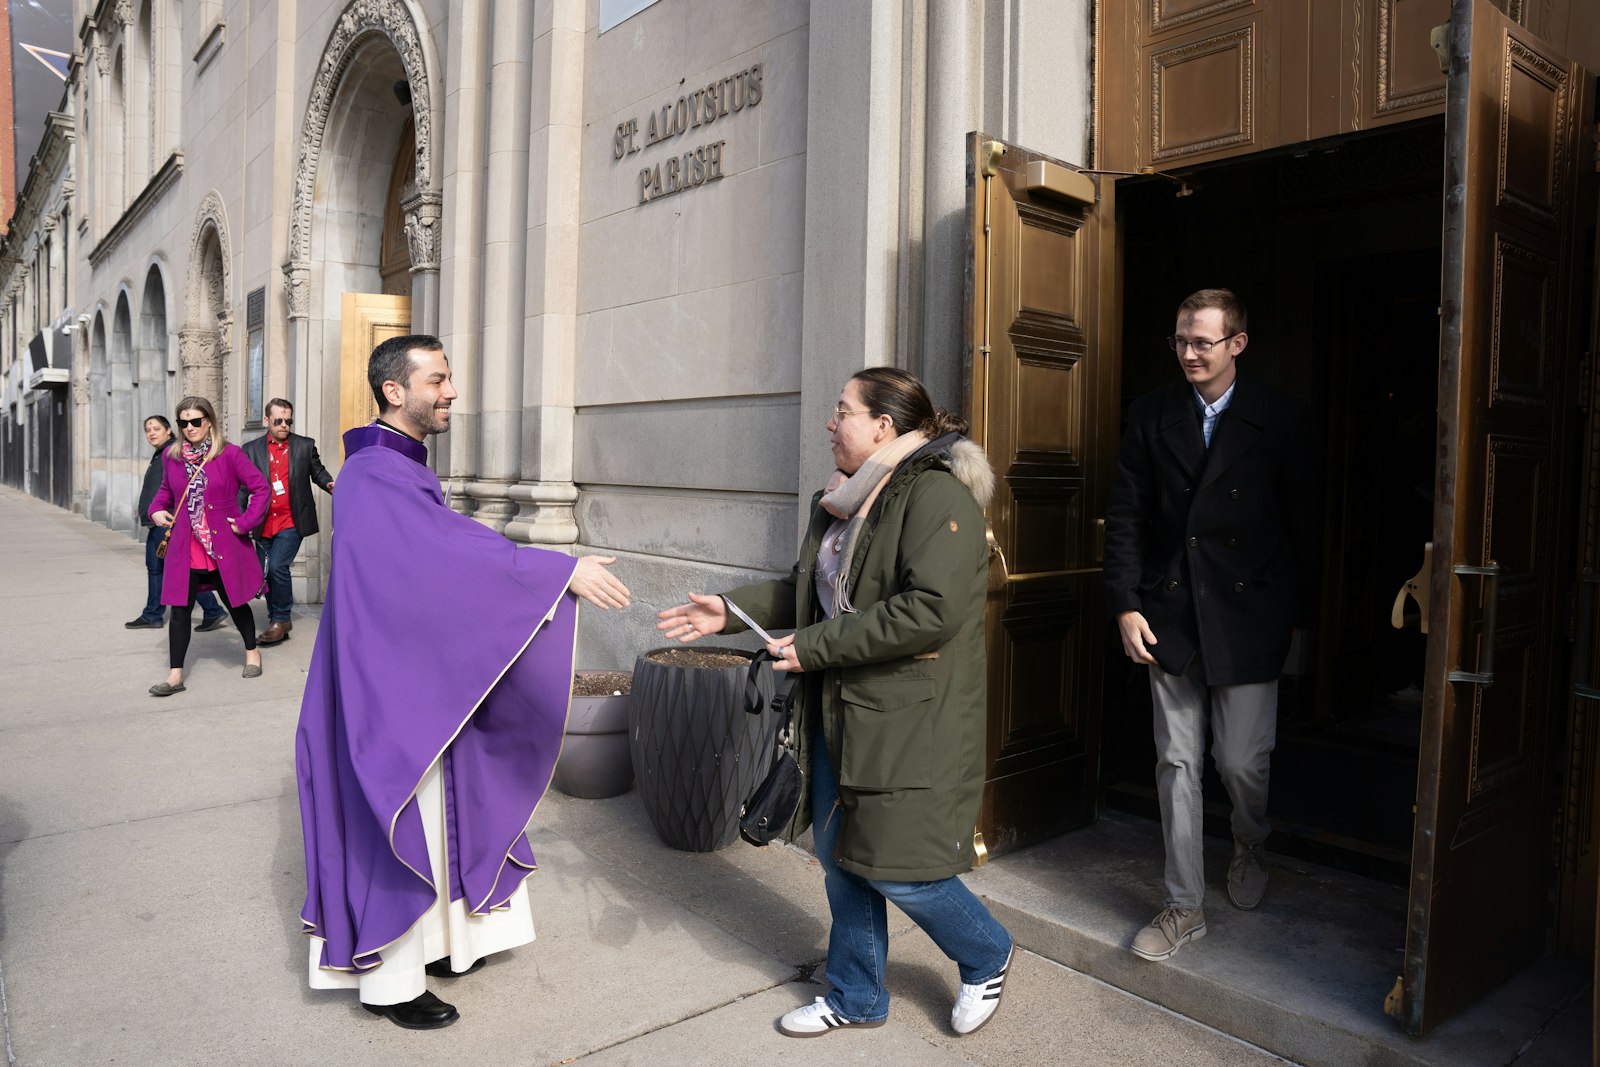 Fr. Mario Amore of St. Aloysius Parish greets parishioners after Mass. Archbishop Vigneron challenged Catholics gathered on Ash Wednesday to consider how God is calling them to engage in a great campaign to win back the world for Christ.